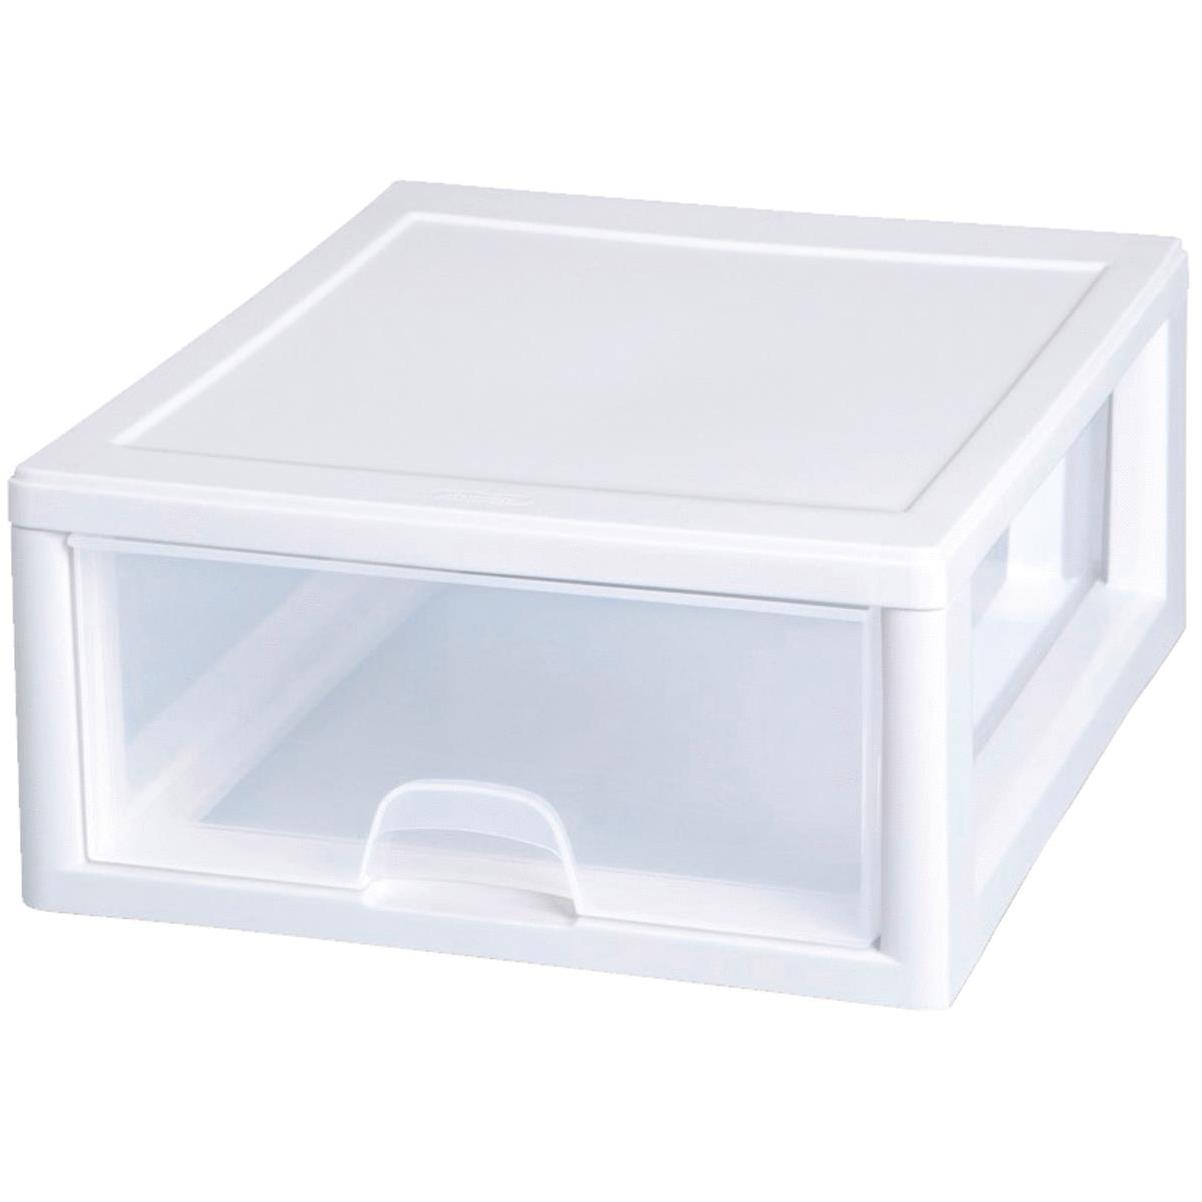 Sterilite - 16 Quart Clear Plastic Stacking Storage Drawer Container Box (12 Pack)